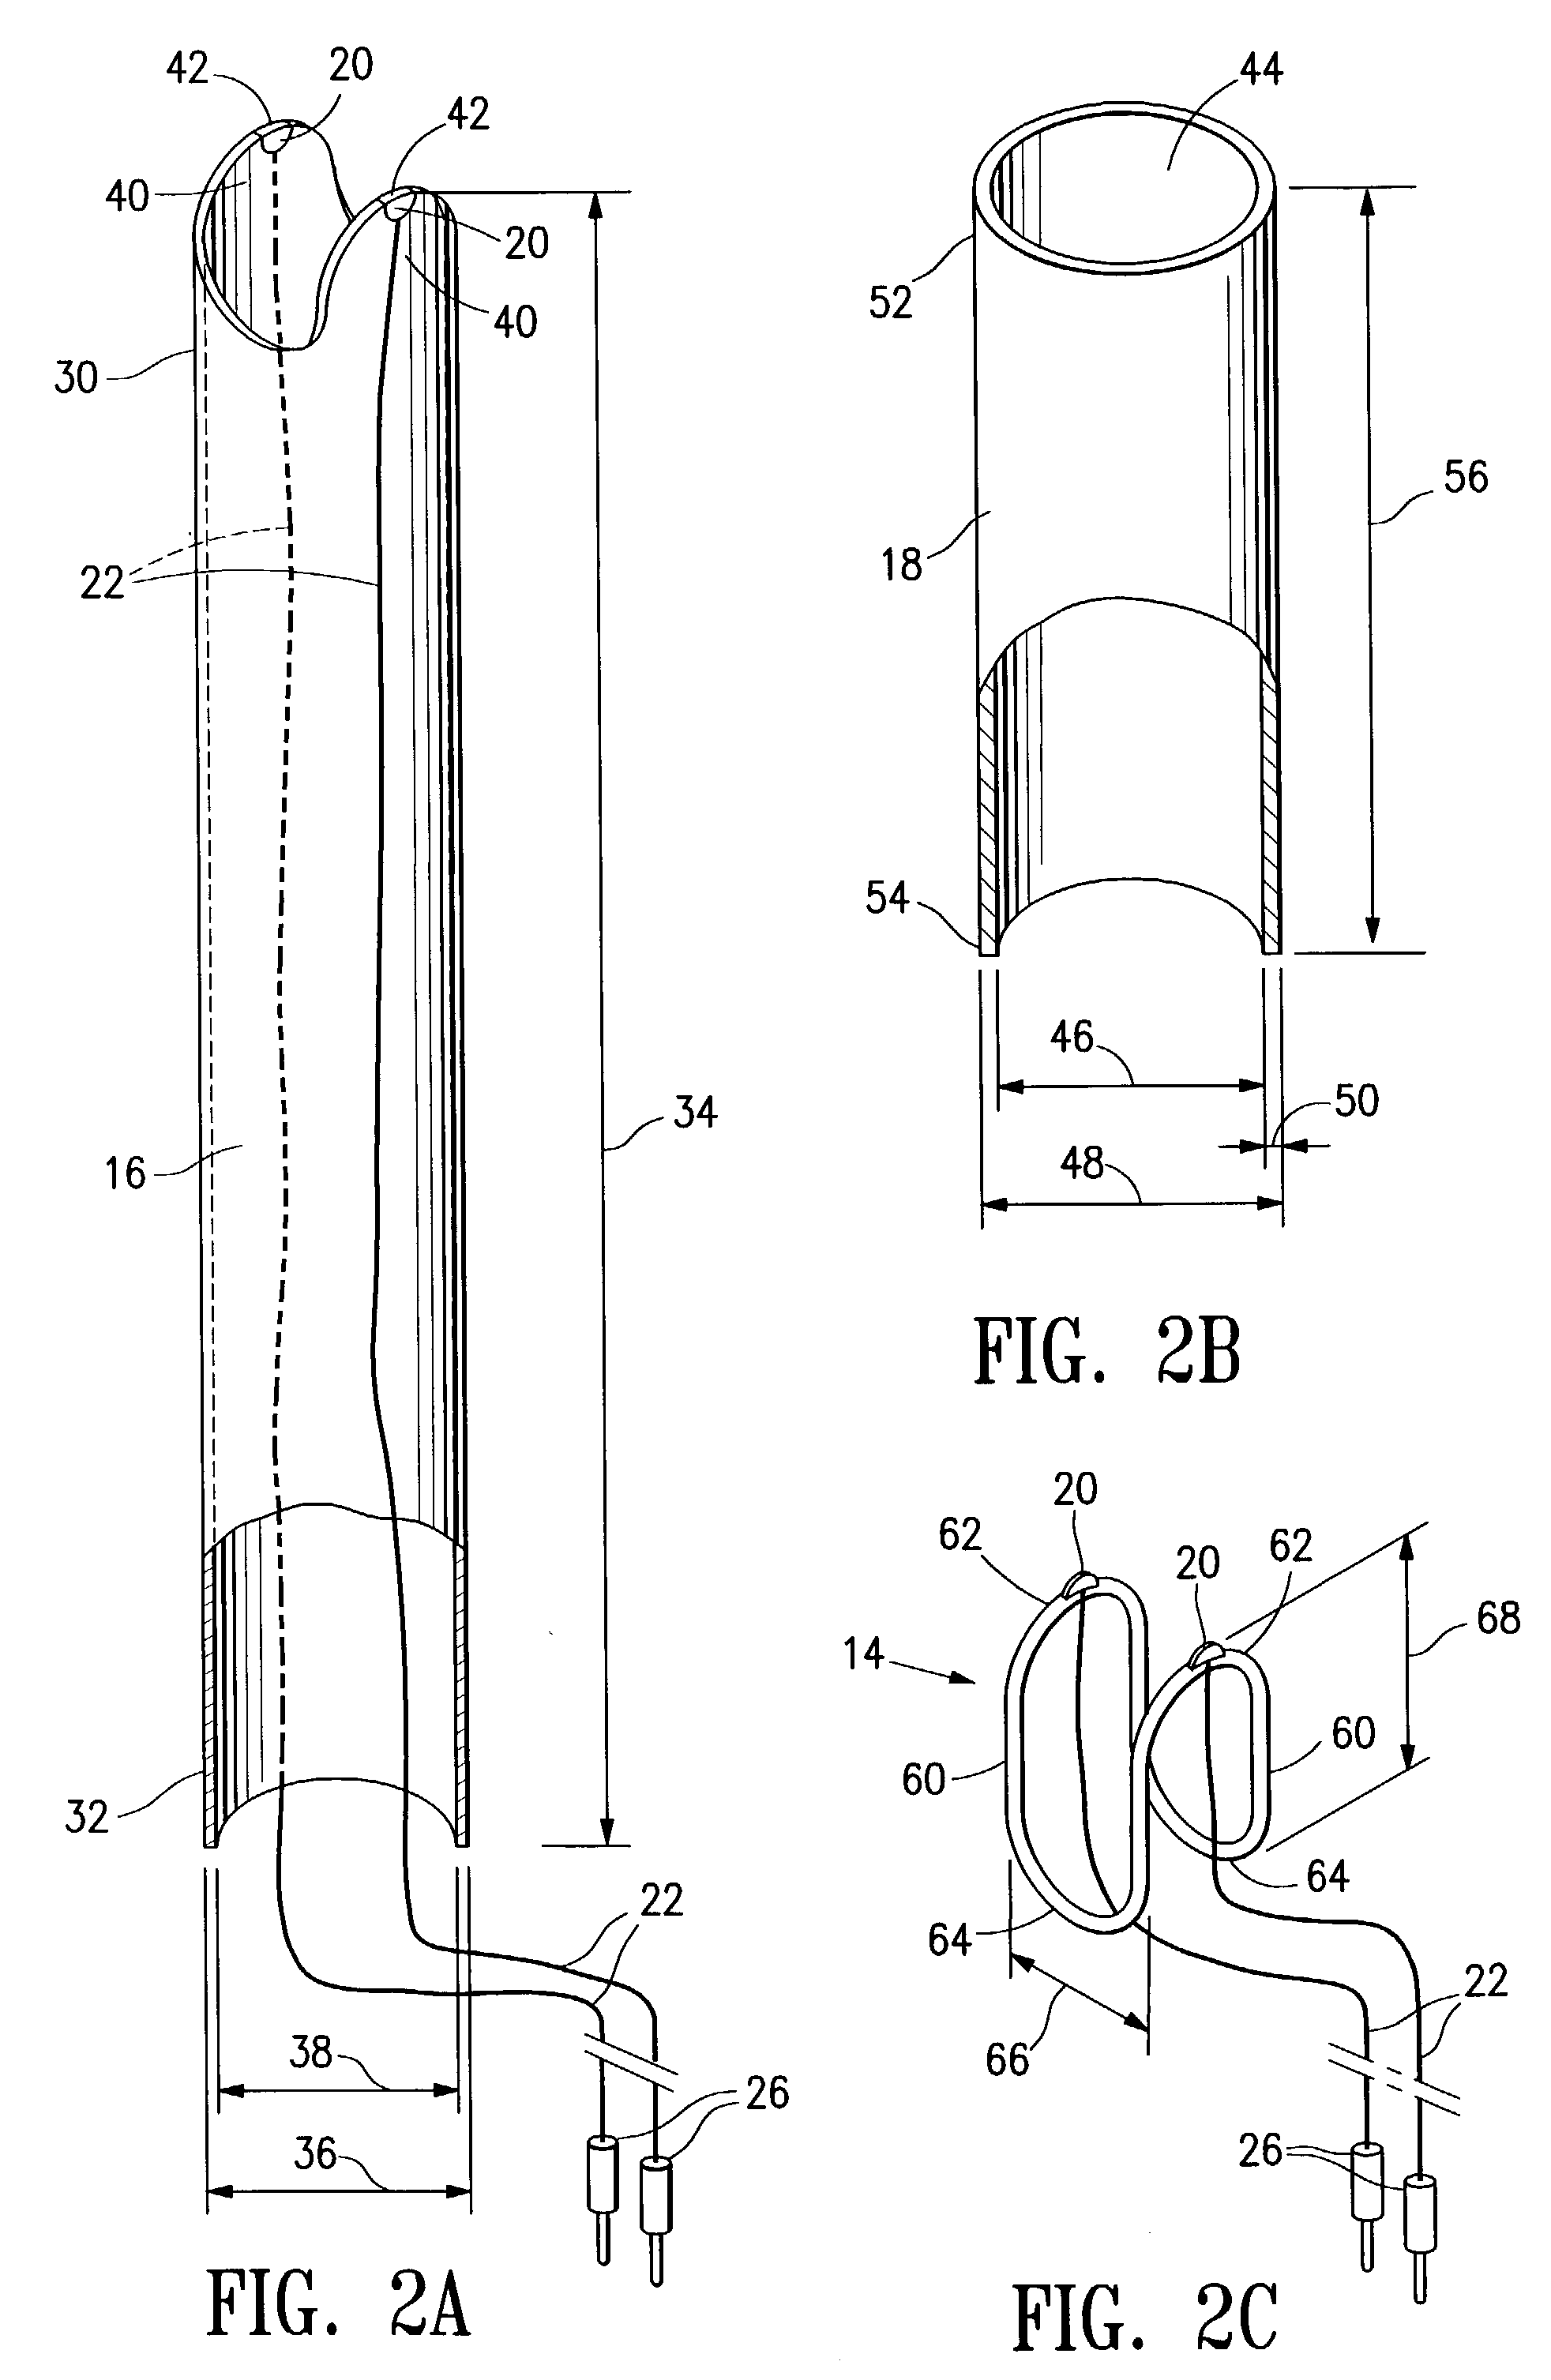 Deployable constrictor for uterine artery occlusion